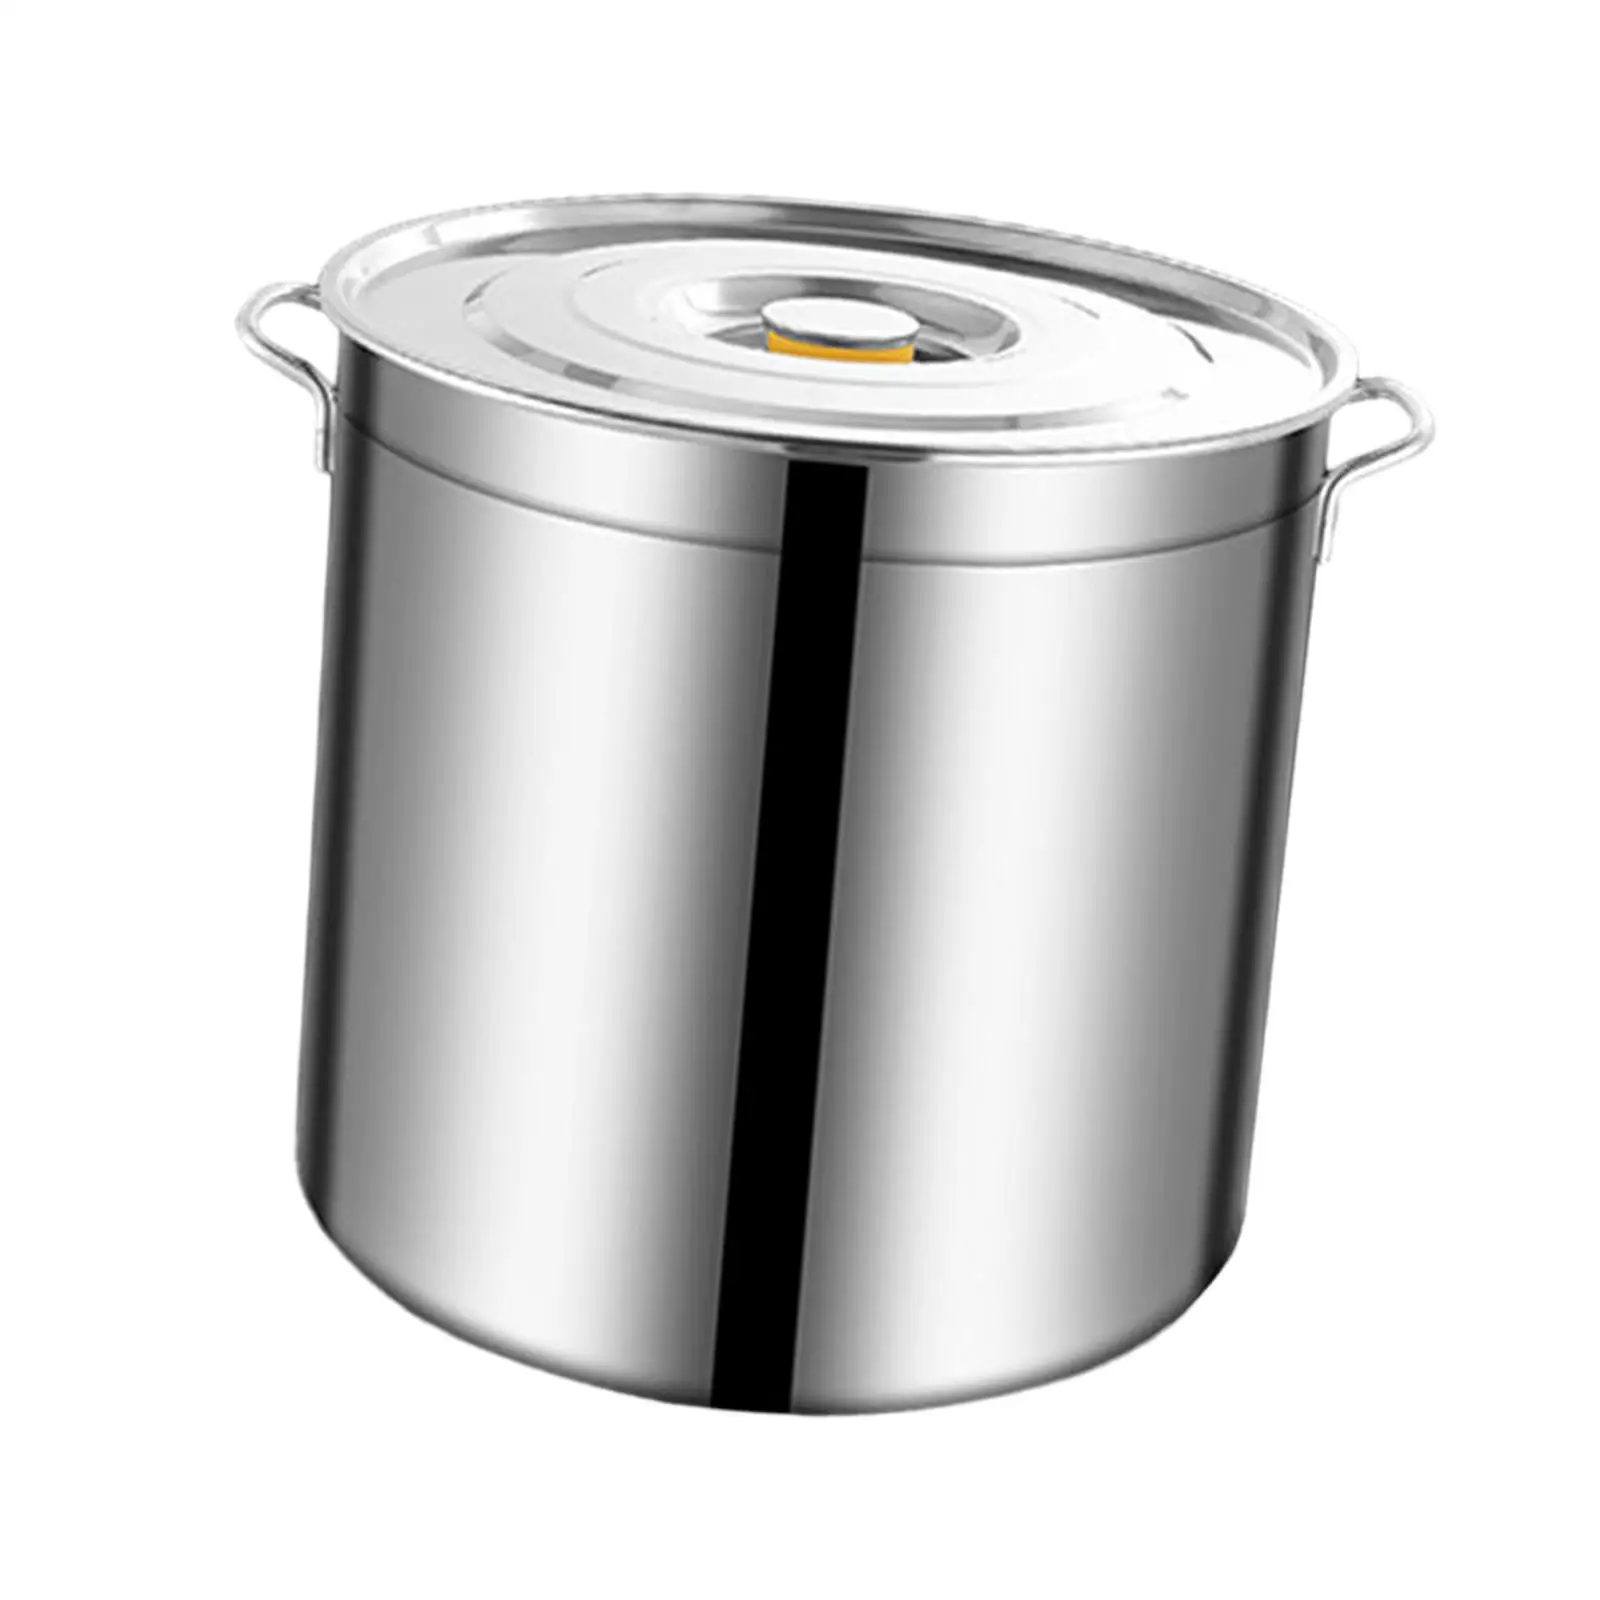 Stainless Steel Stockpot Oil Bucket for Boiling Strew Simmer with Lid Canning Pasta Pot for Hotel Commercial Household Canteens